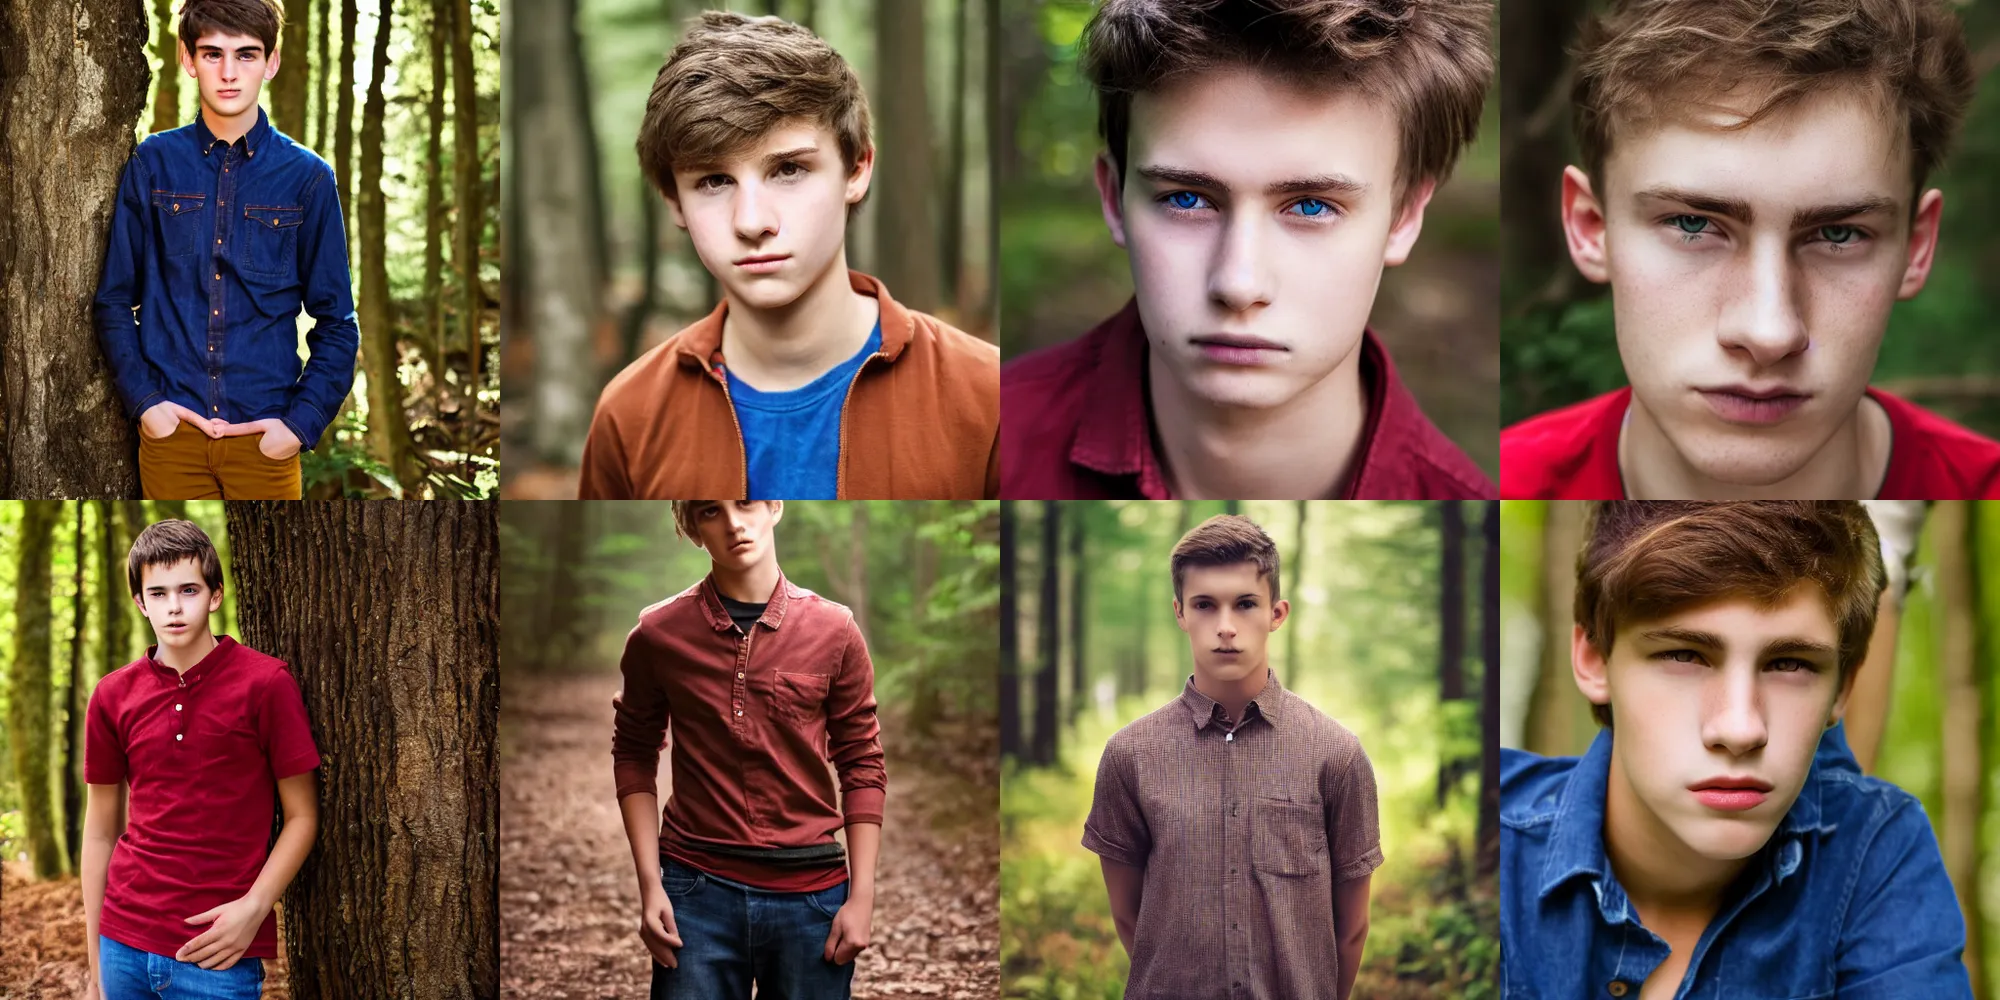 Prompt: portrait, male teenager, brown hair, red shirt, blue jeans, dark shaped eyes, detailed face, walking in forest, realistic photo.